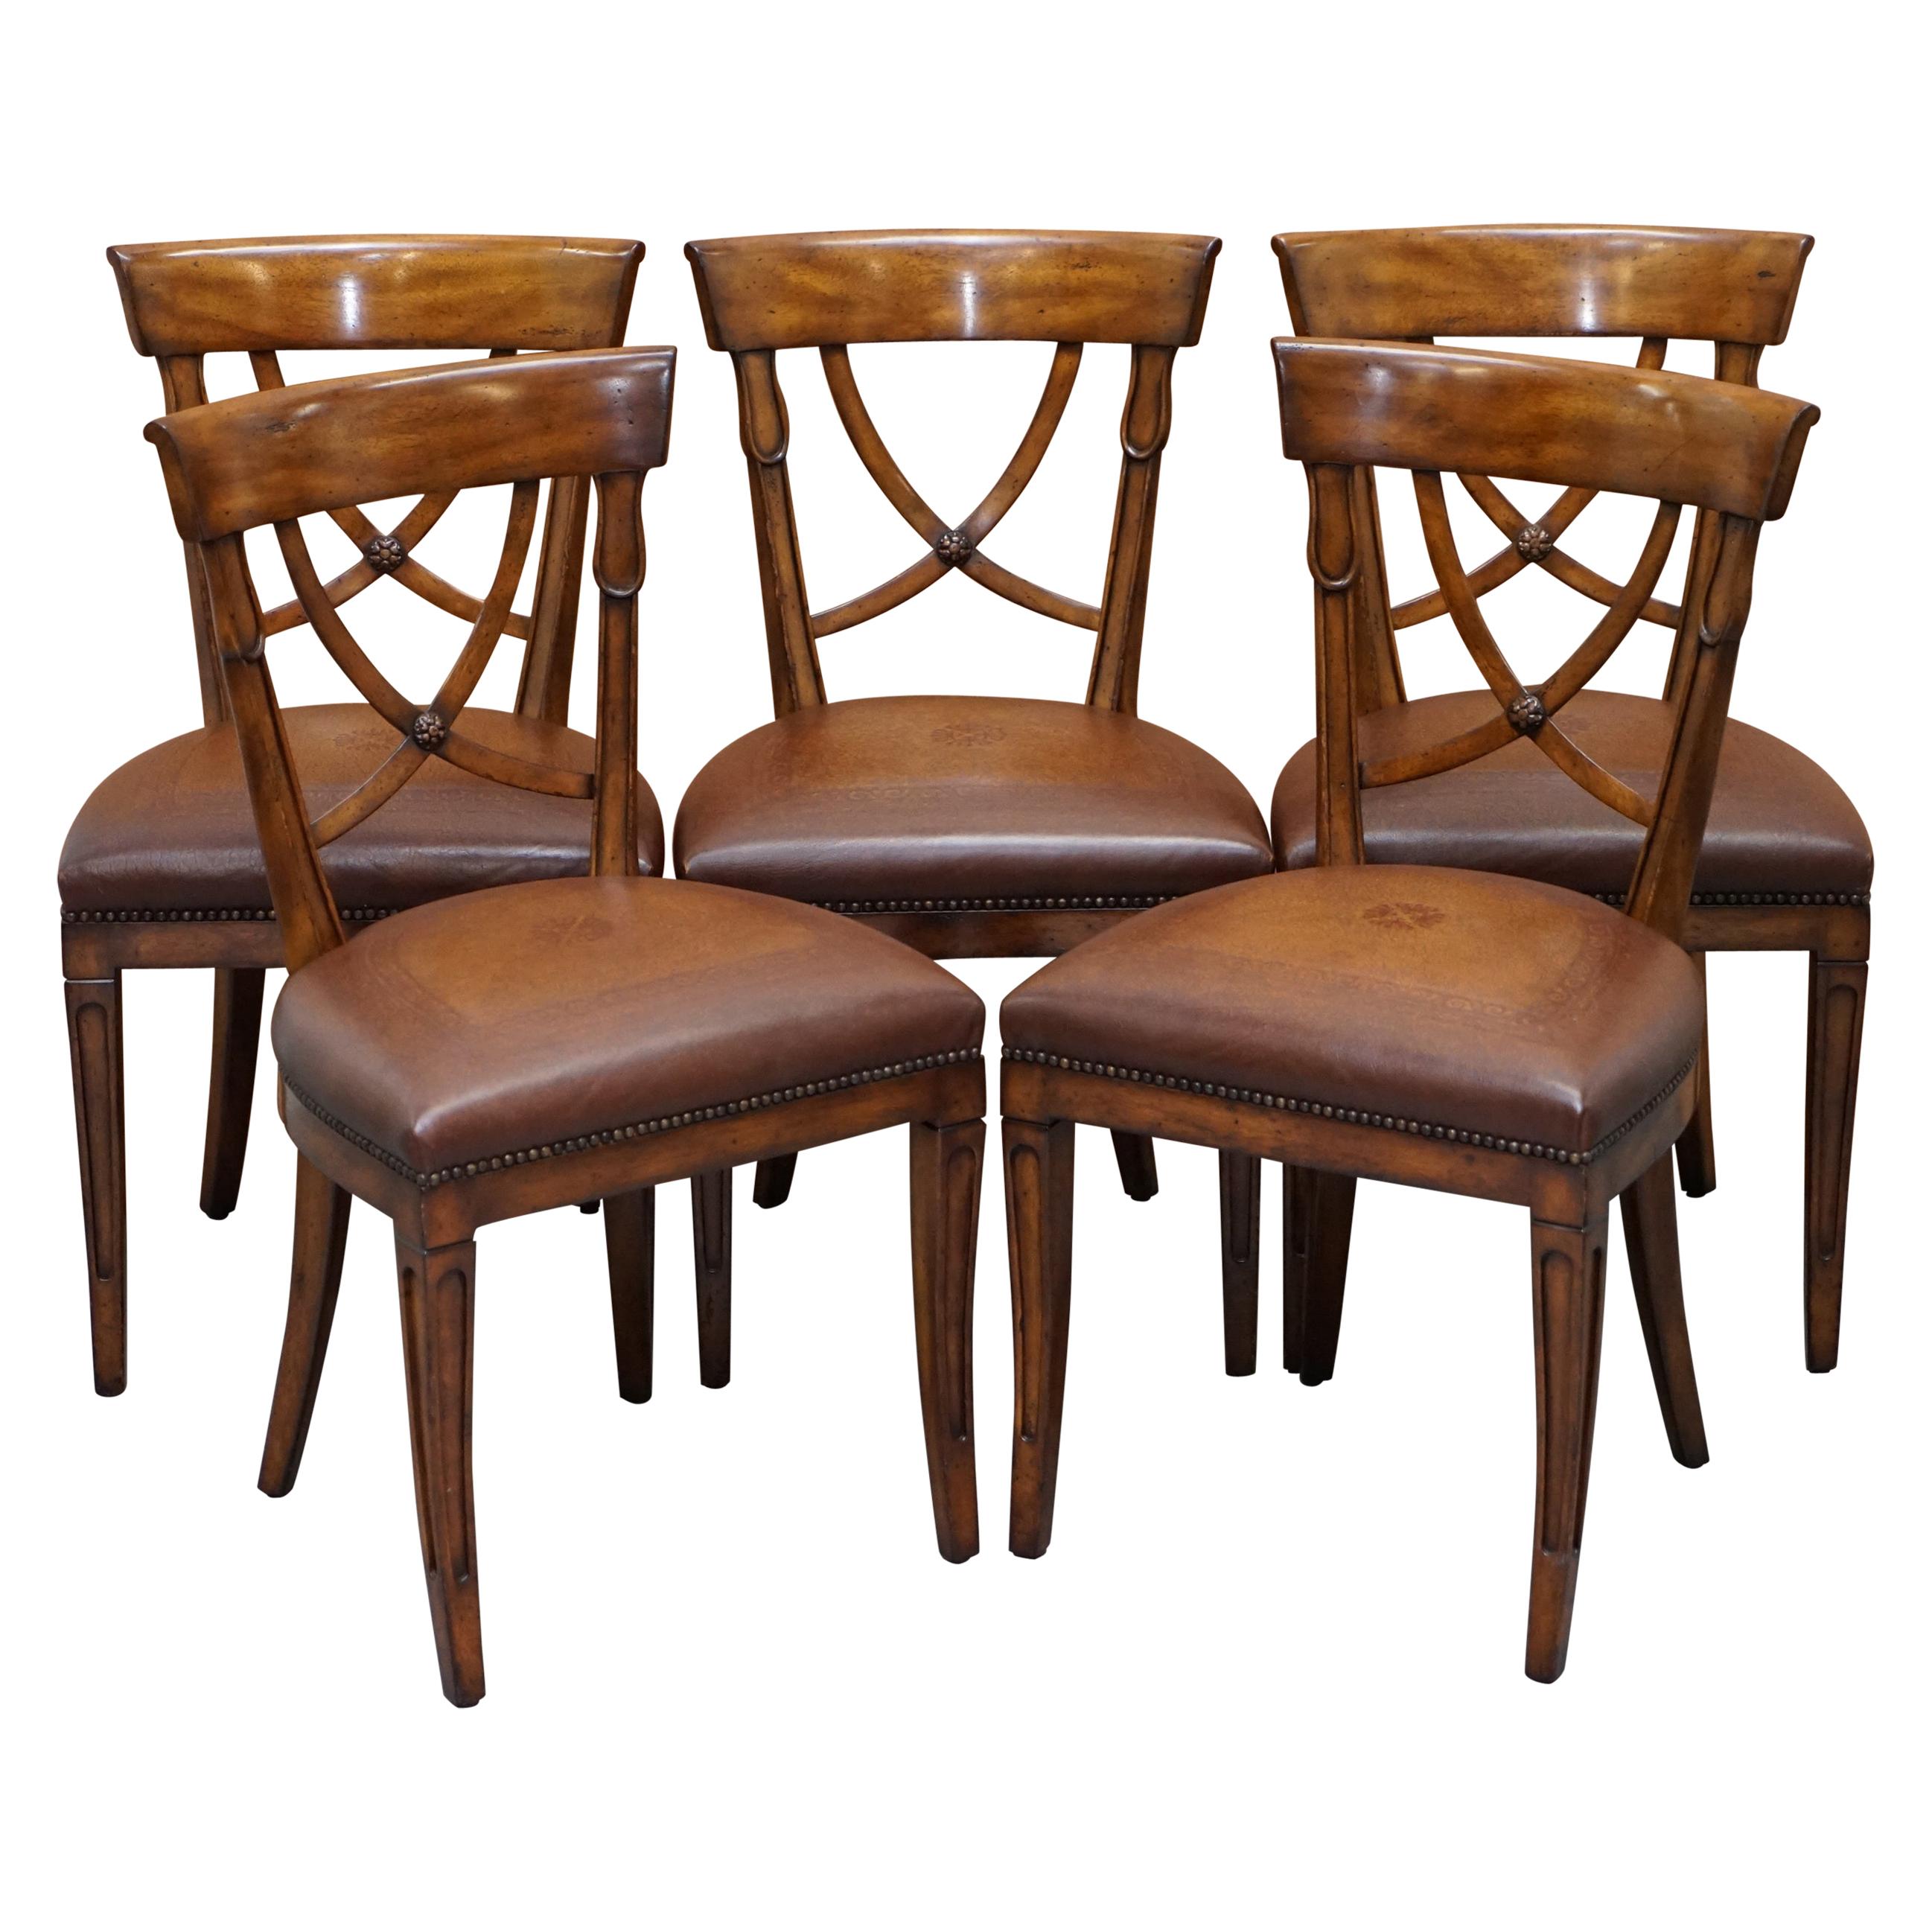 Set of Five Theodore Alexander Regency Brown Leather Dining Chairs